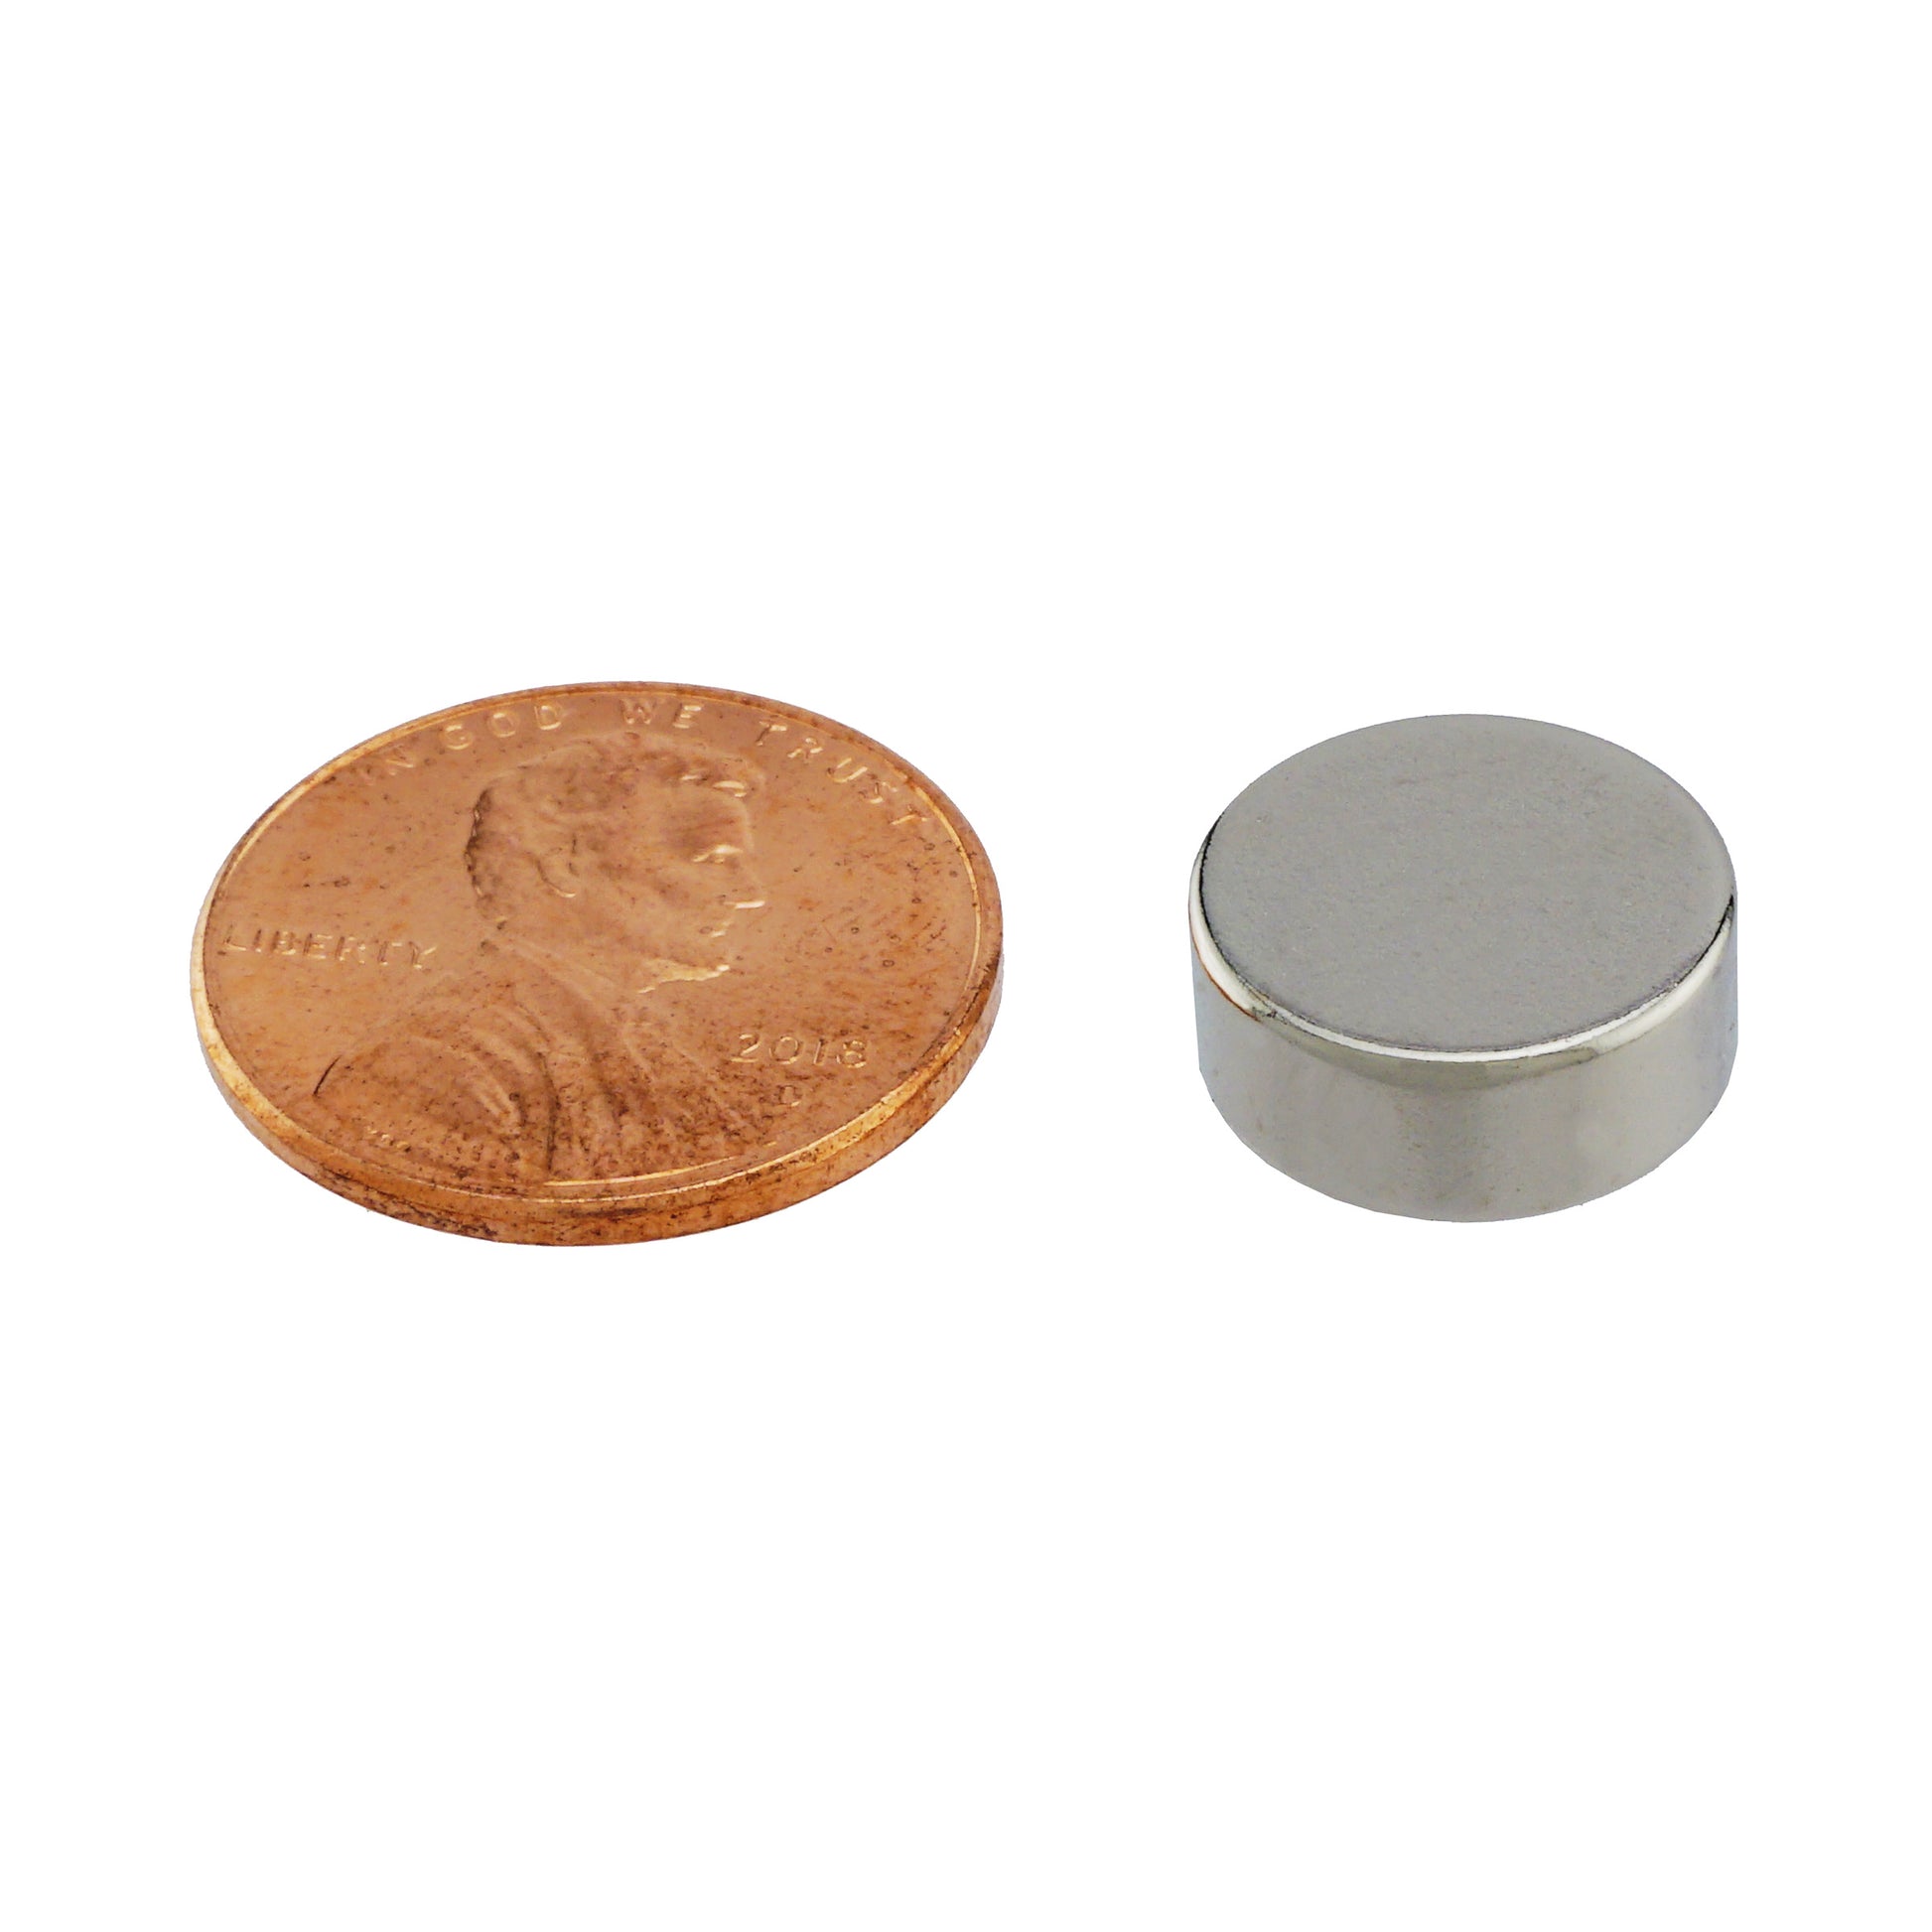 Load image into Gallery viewer, ND140N-35 Neodymium Disc Magnet - Compared to Penny for Size Reference